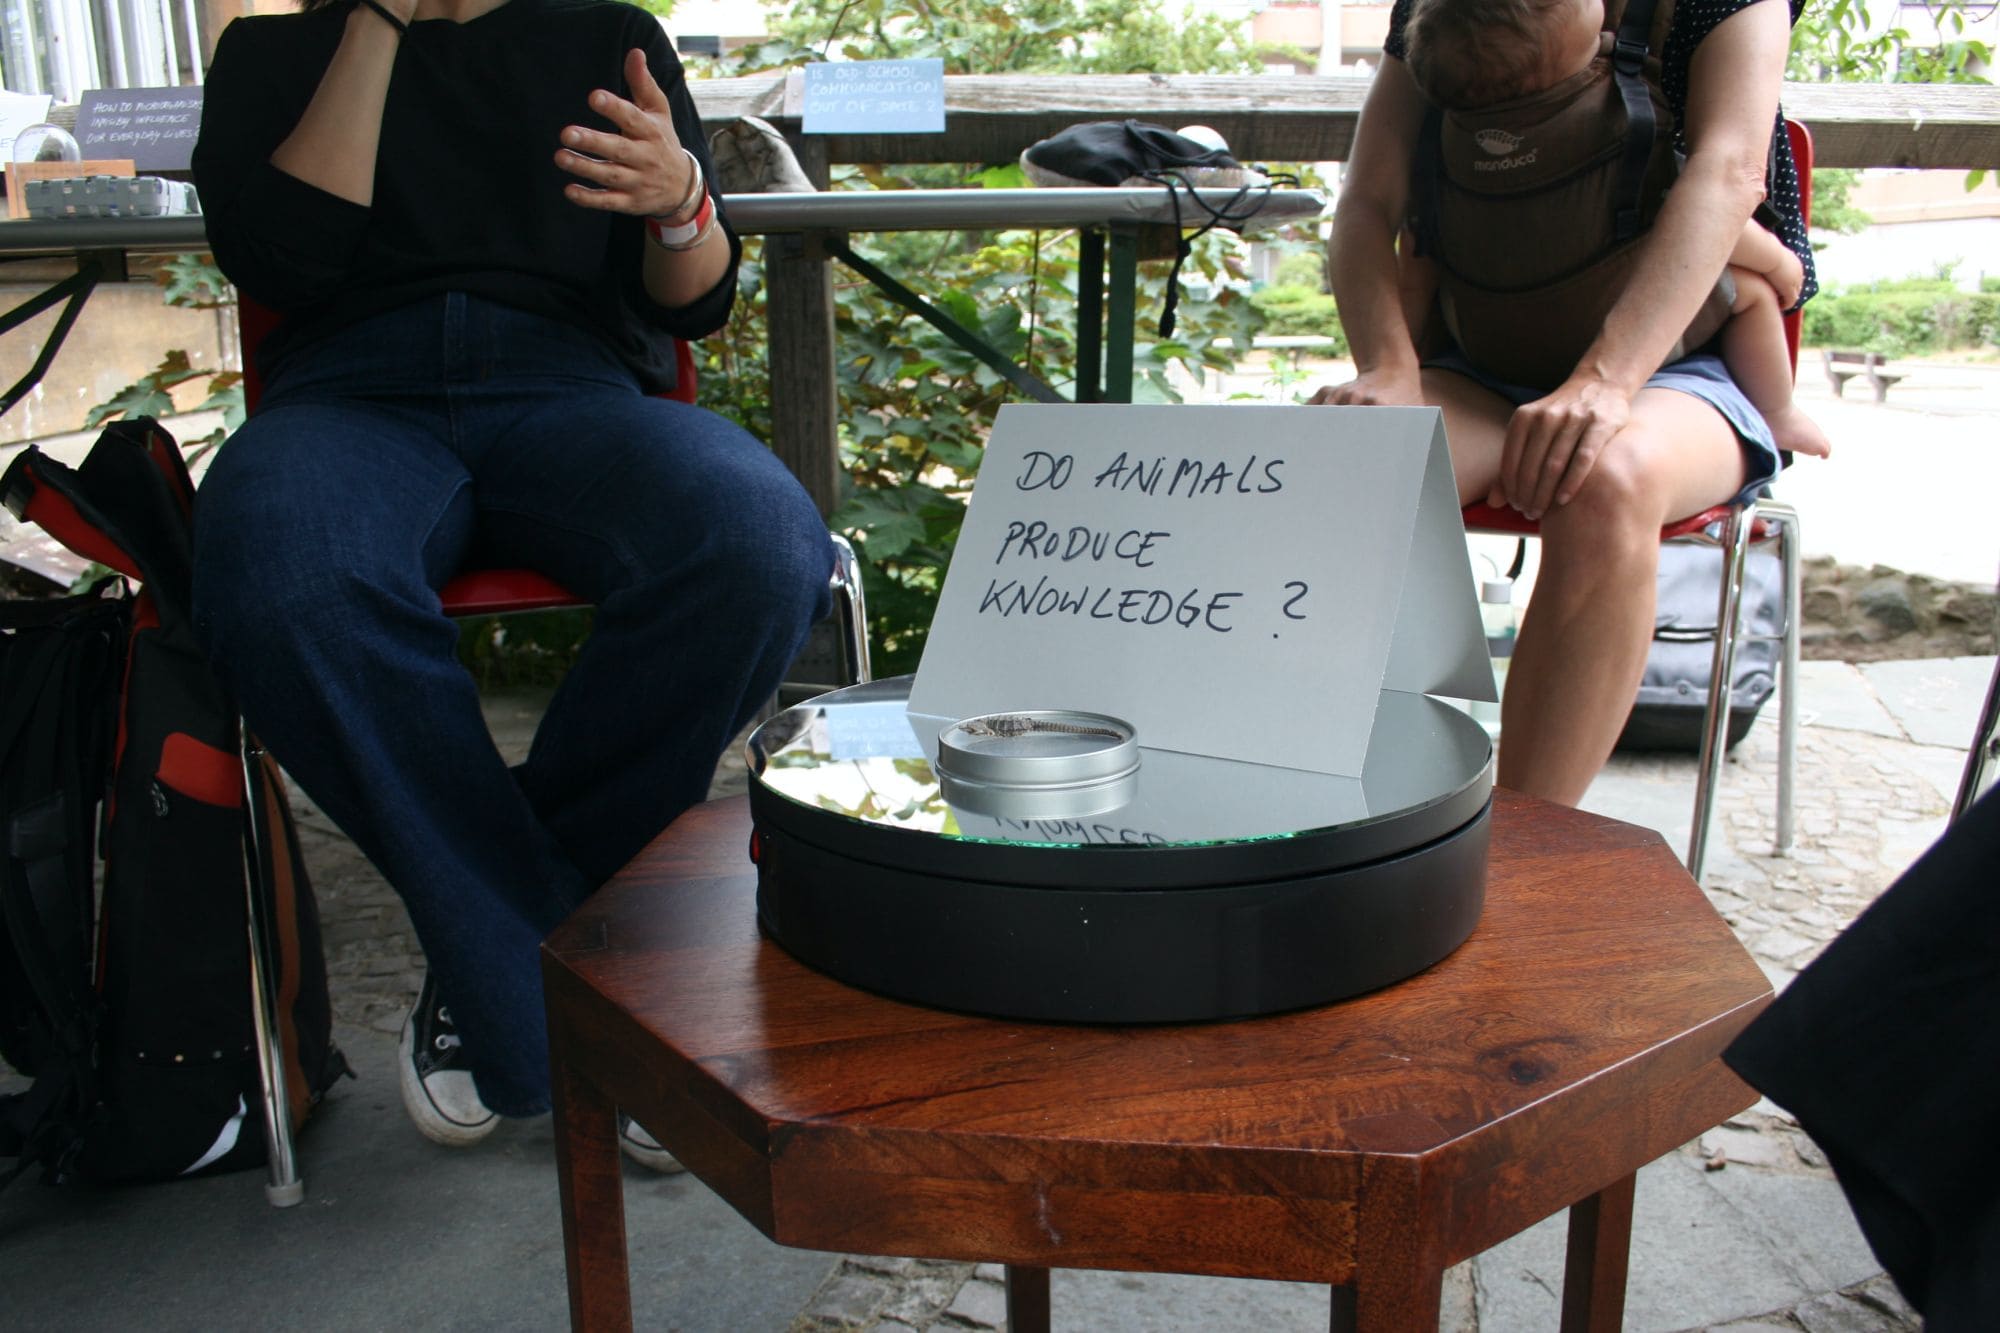 two people seated at a small table a folded paper with the words: "Do Animals Produce Knowledge?"